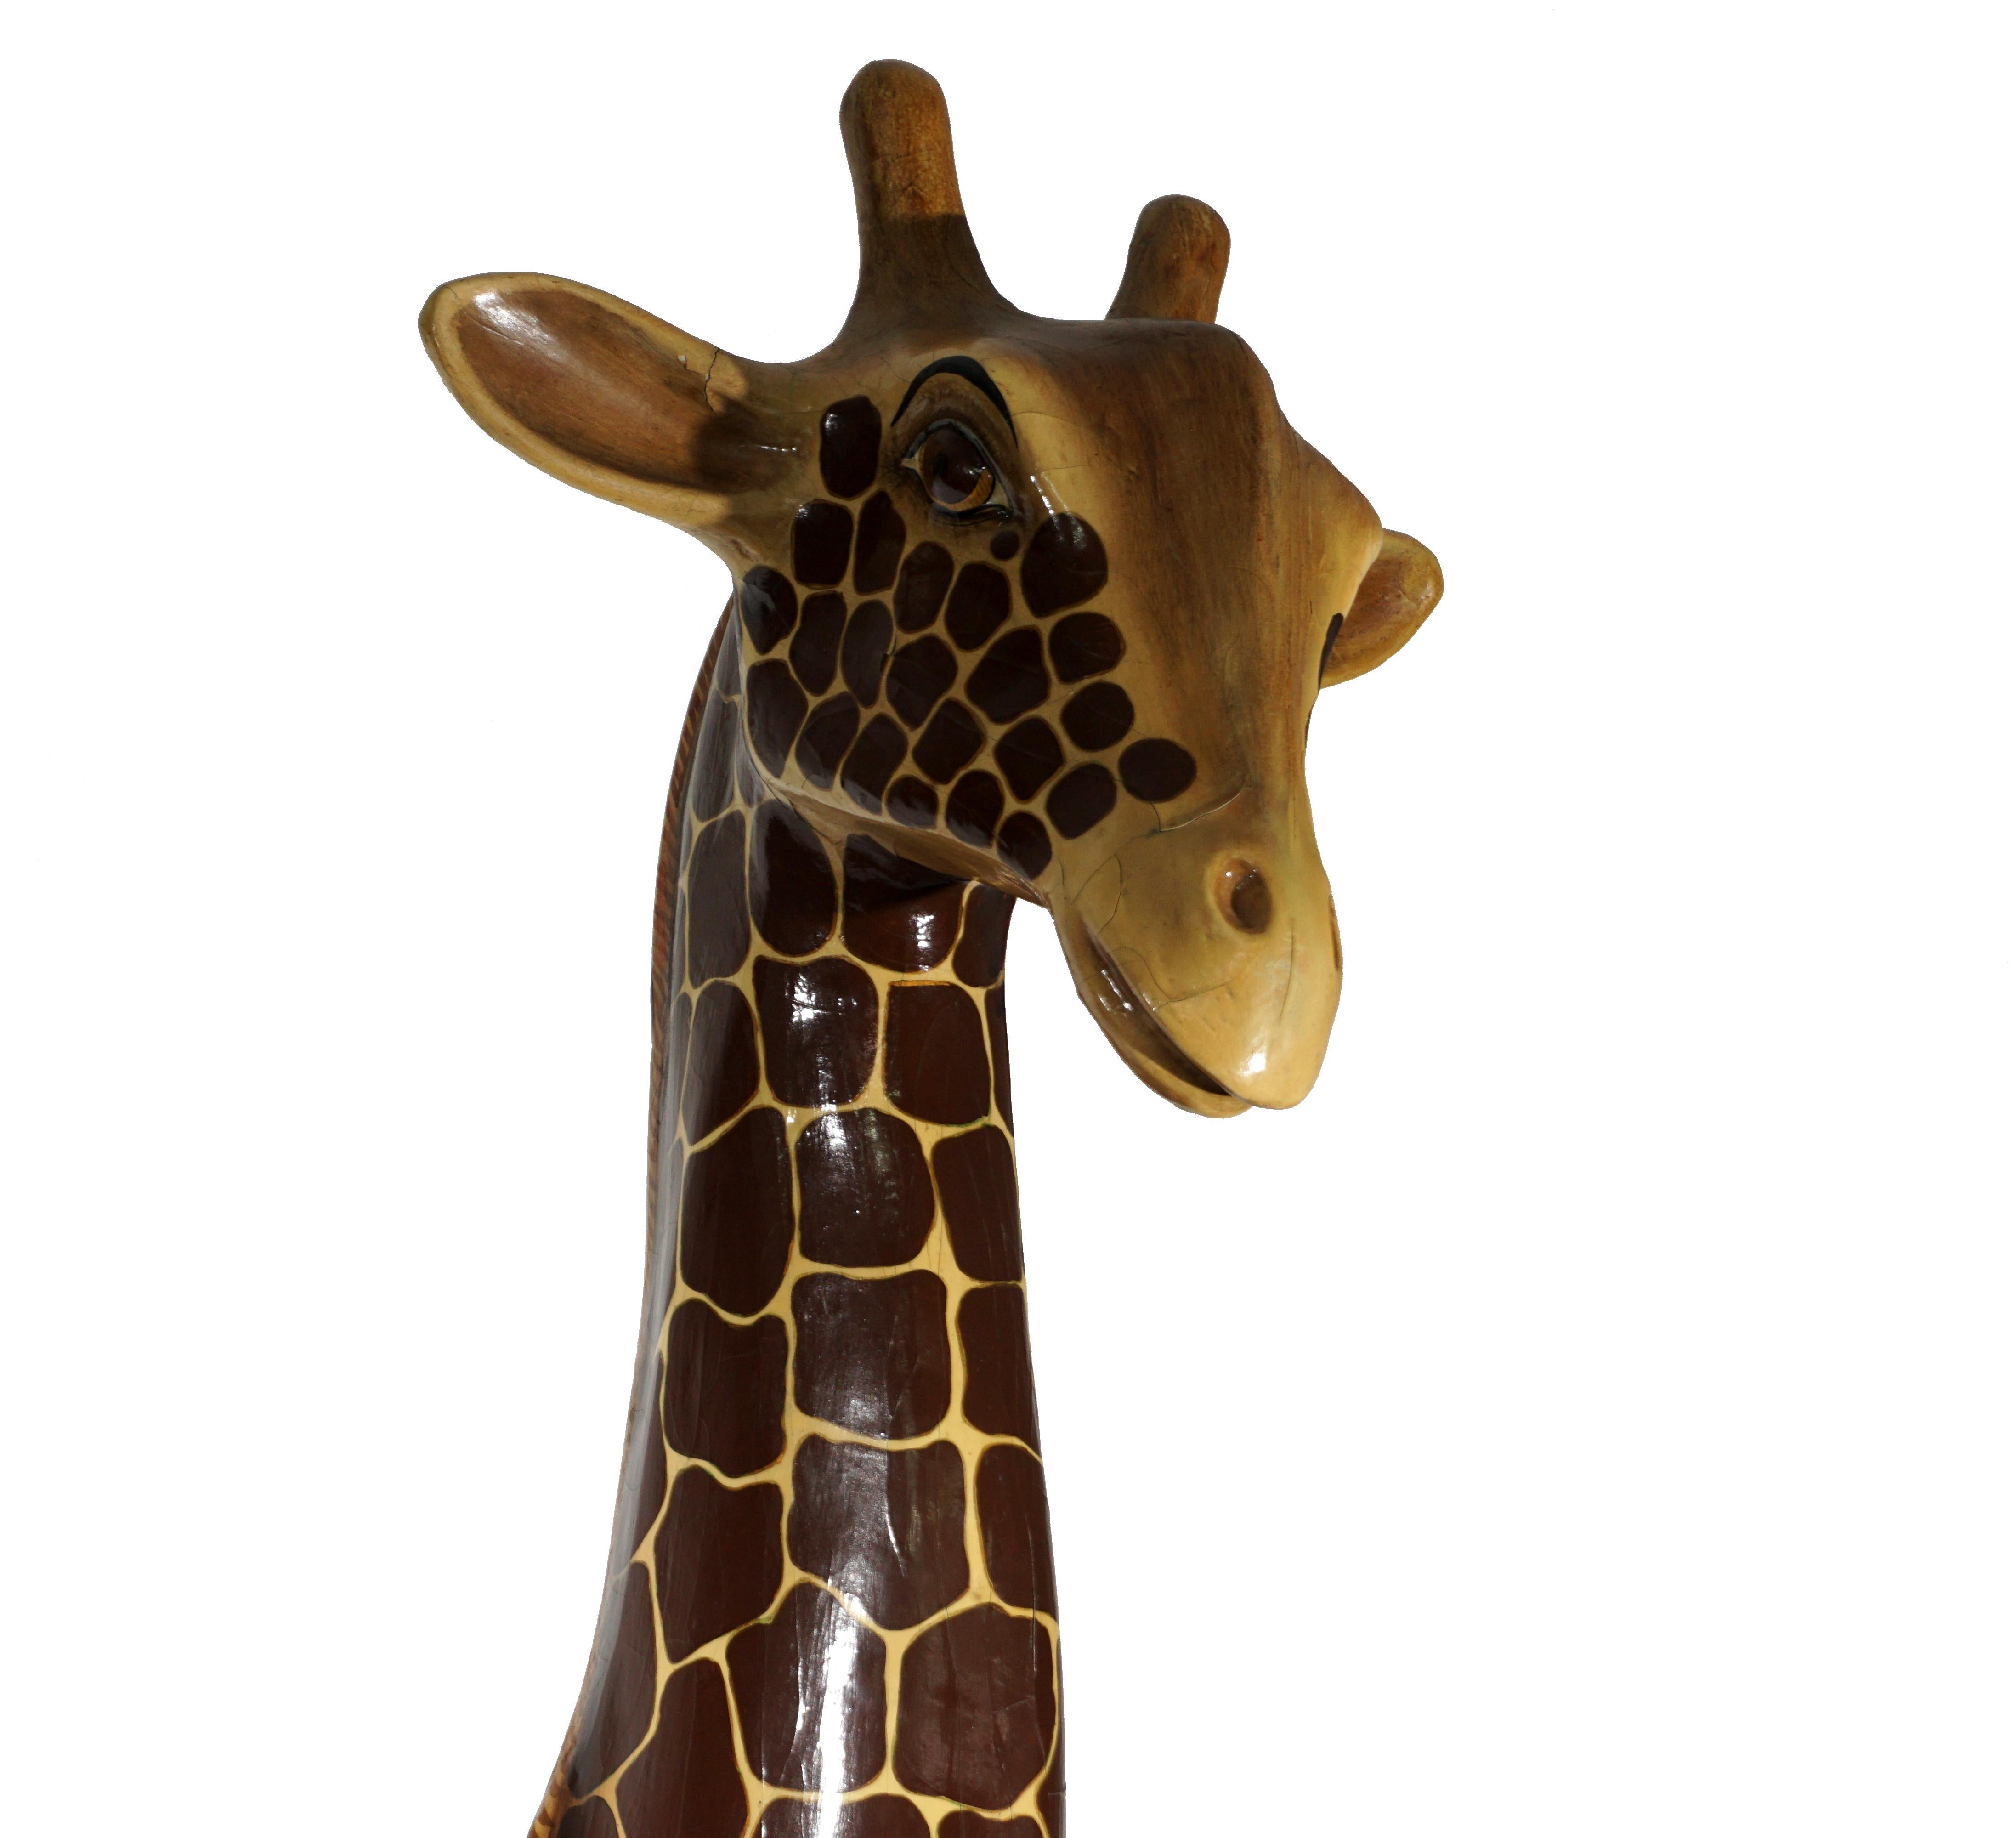 Beautiful hand-crafter paper mache bust sculpture of a Giraffe by Mexican Artist Sergio Bustamante from his 1970's period.
Overall great condition, the cracking is normal with age and is well integrated.